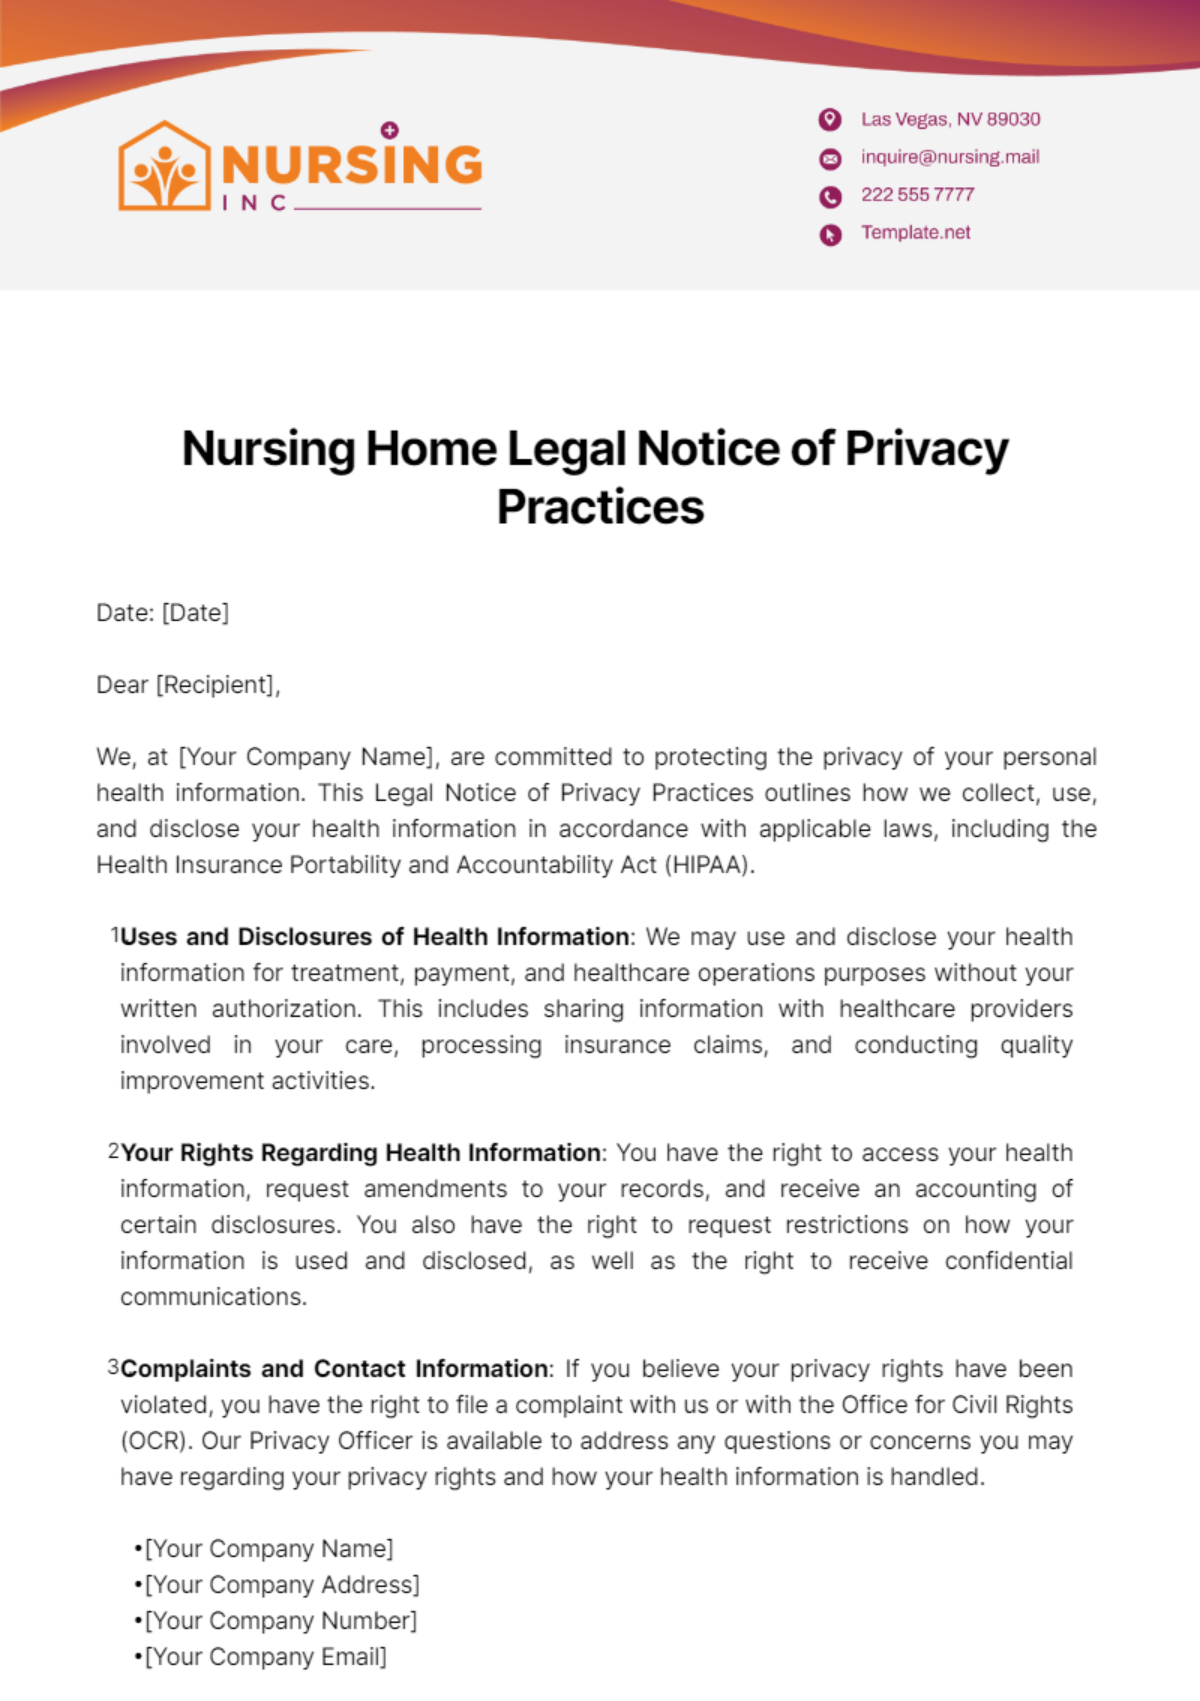 Nursing Home Legal Notice of Privacy Practices Template